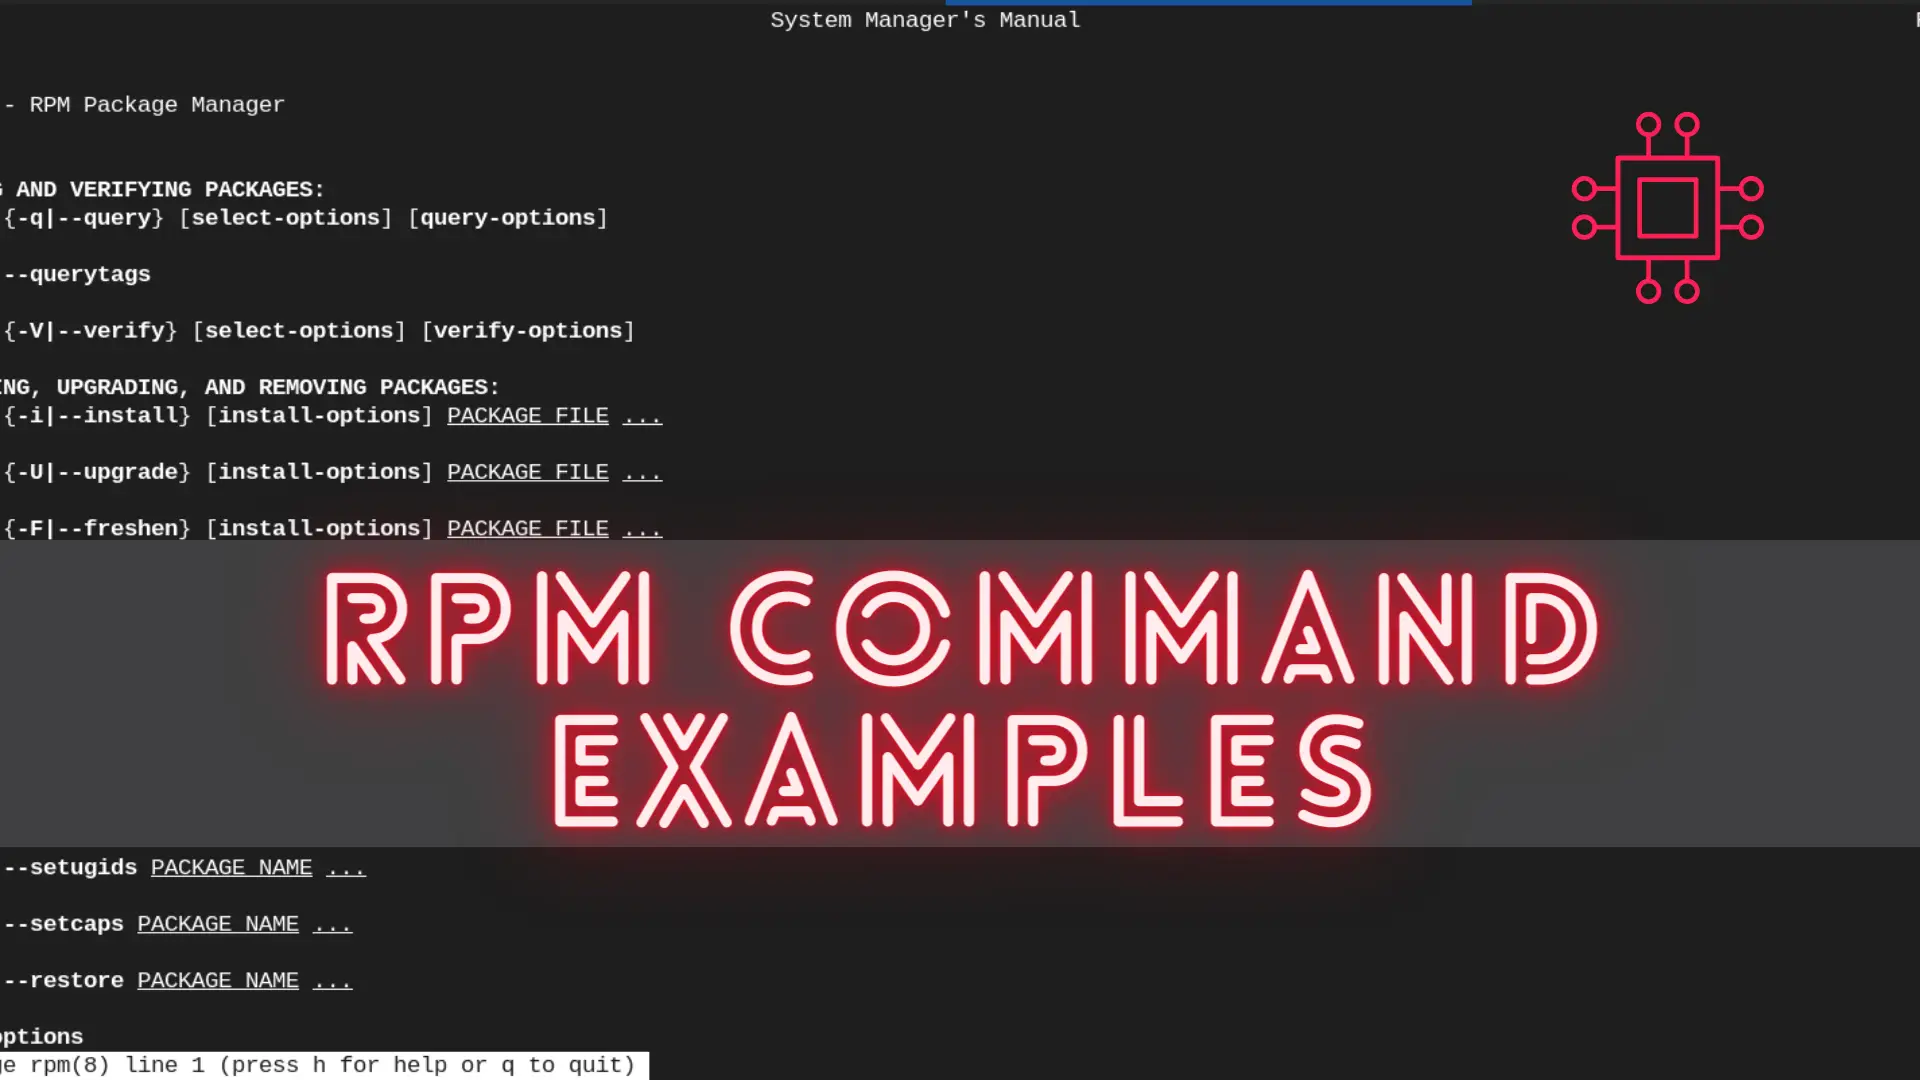 commonly used RPM commands